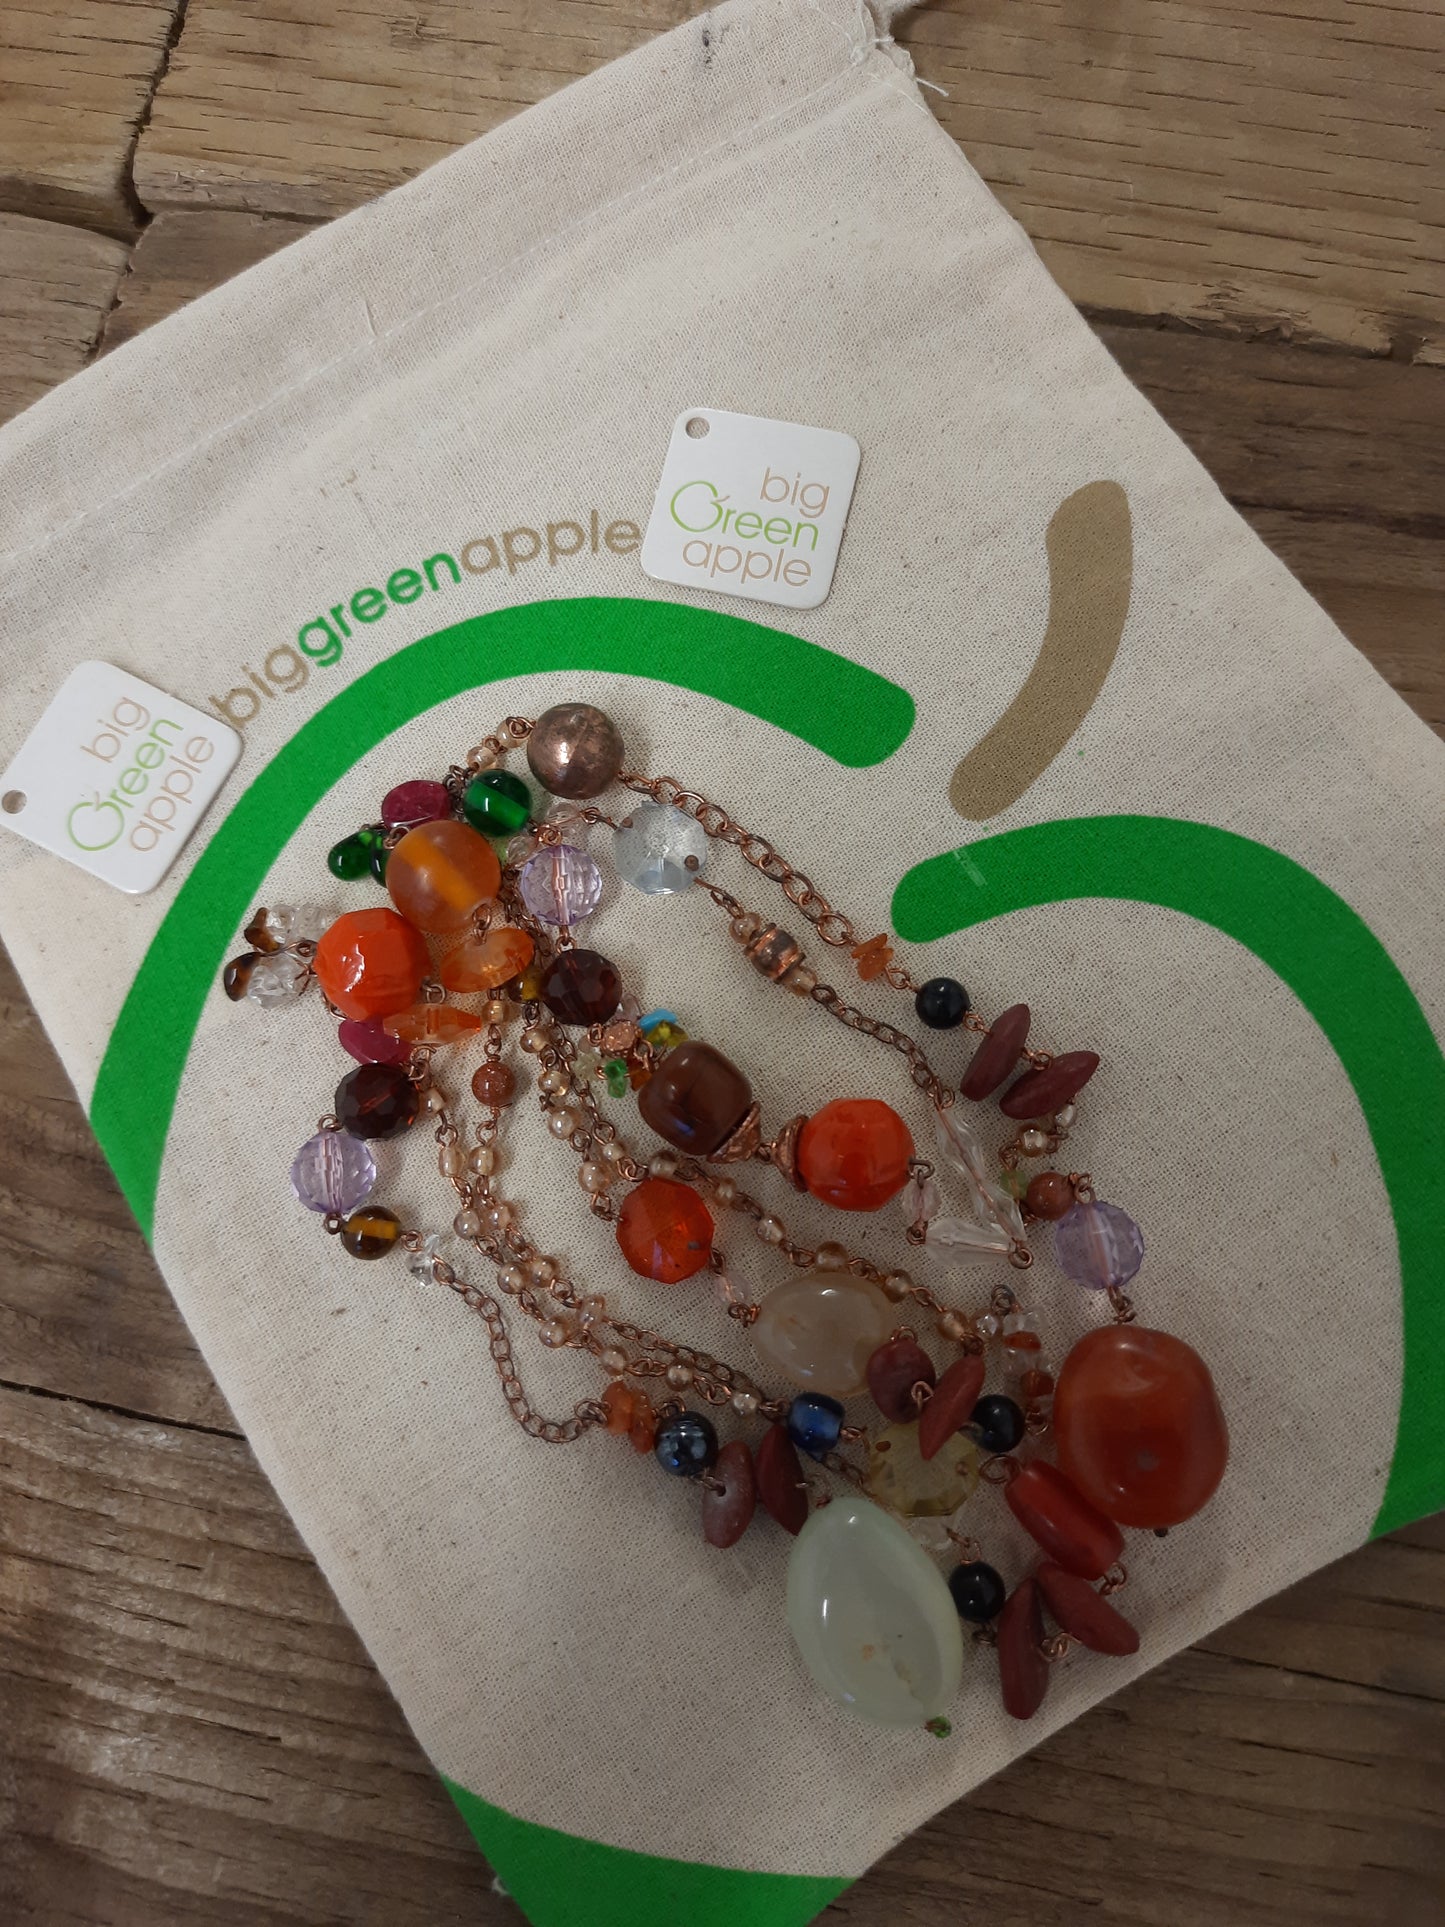 Necklaces, Eco Gifts For Her, Sustainable Brands UK, Ethical Store, Fair Trade Jewelry, BIG GREEN APPLE 